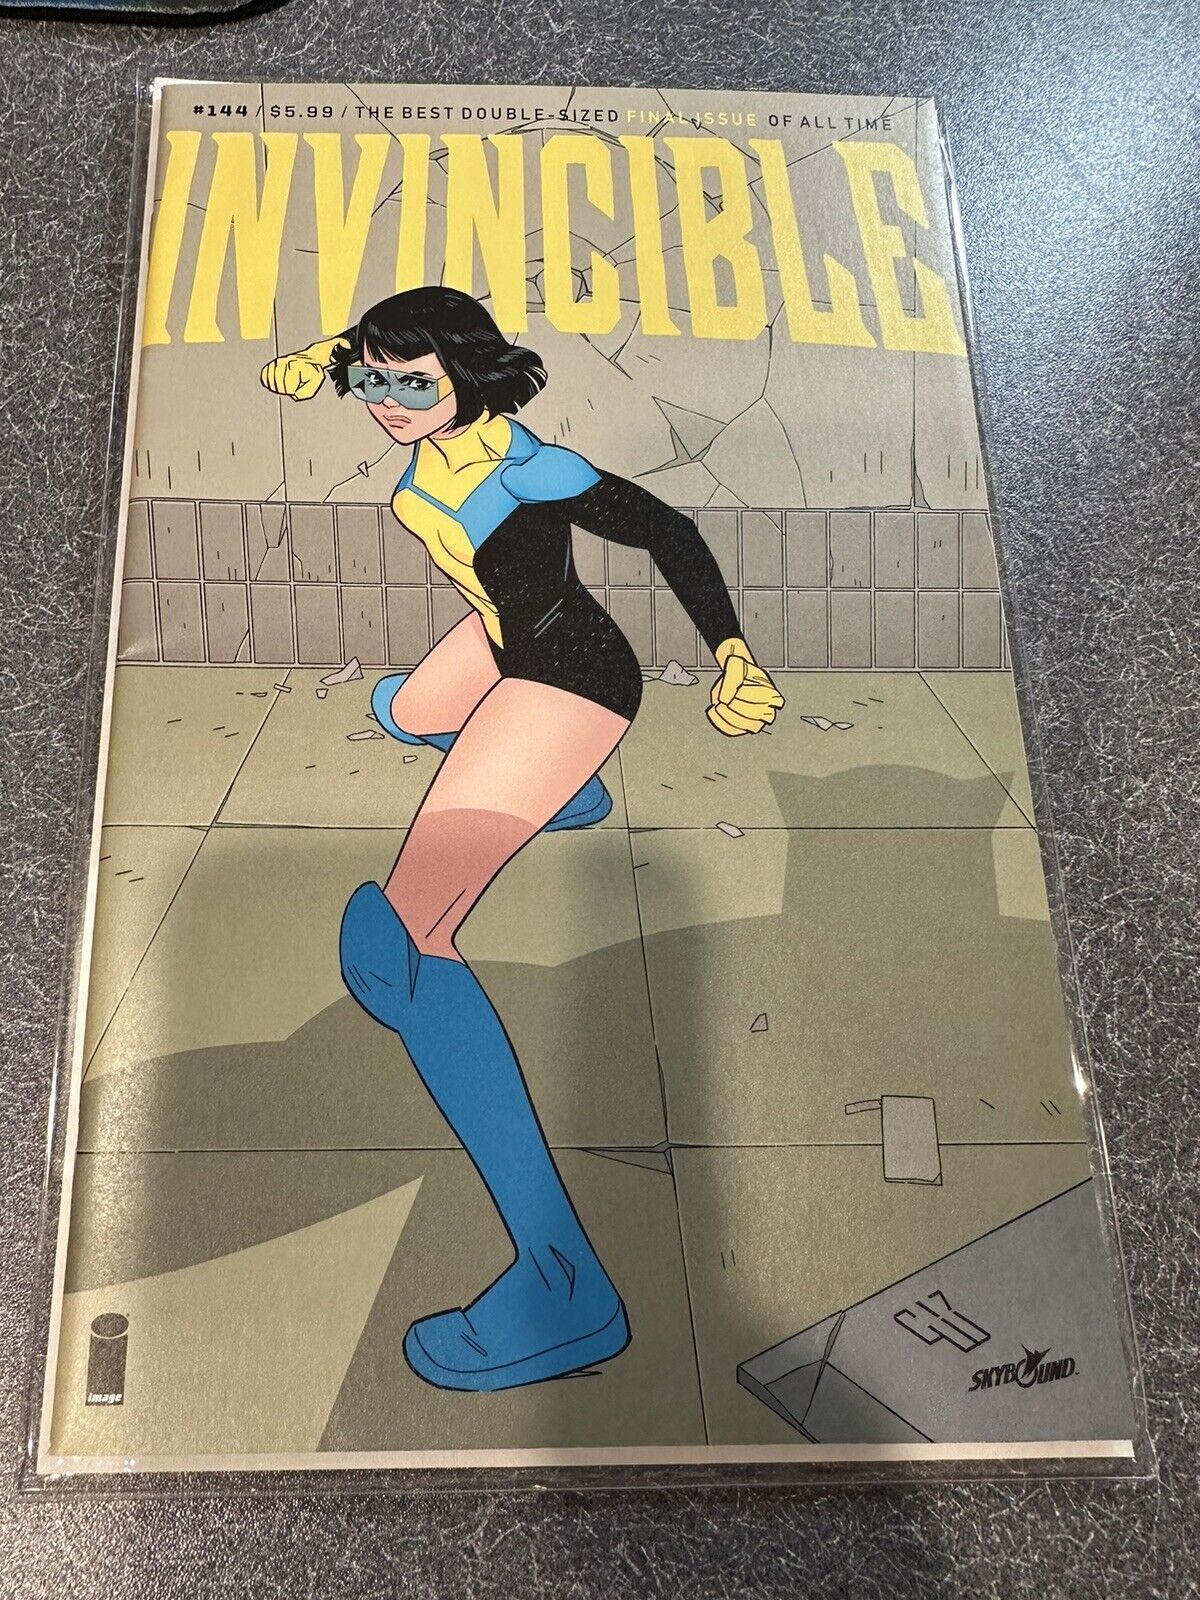 Invincible #144 (2004)  VF/NM or Better  Kirkman Image  Last Issue